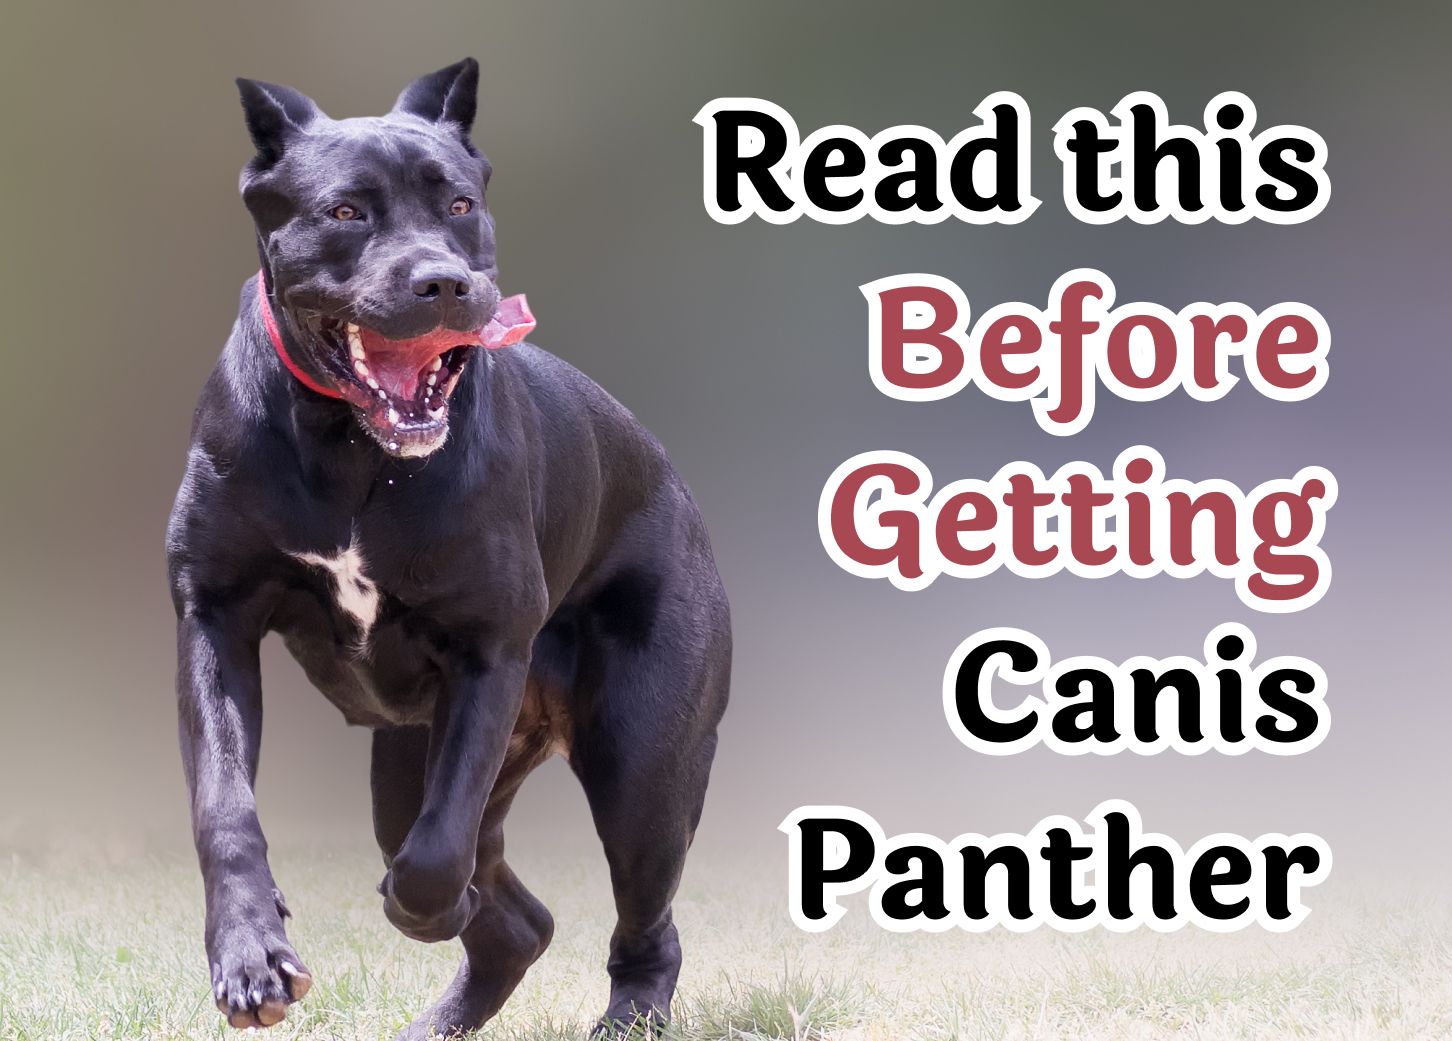 29 Questions to Consider Before Getting A Canis Panther